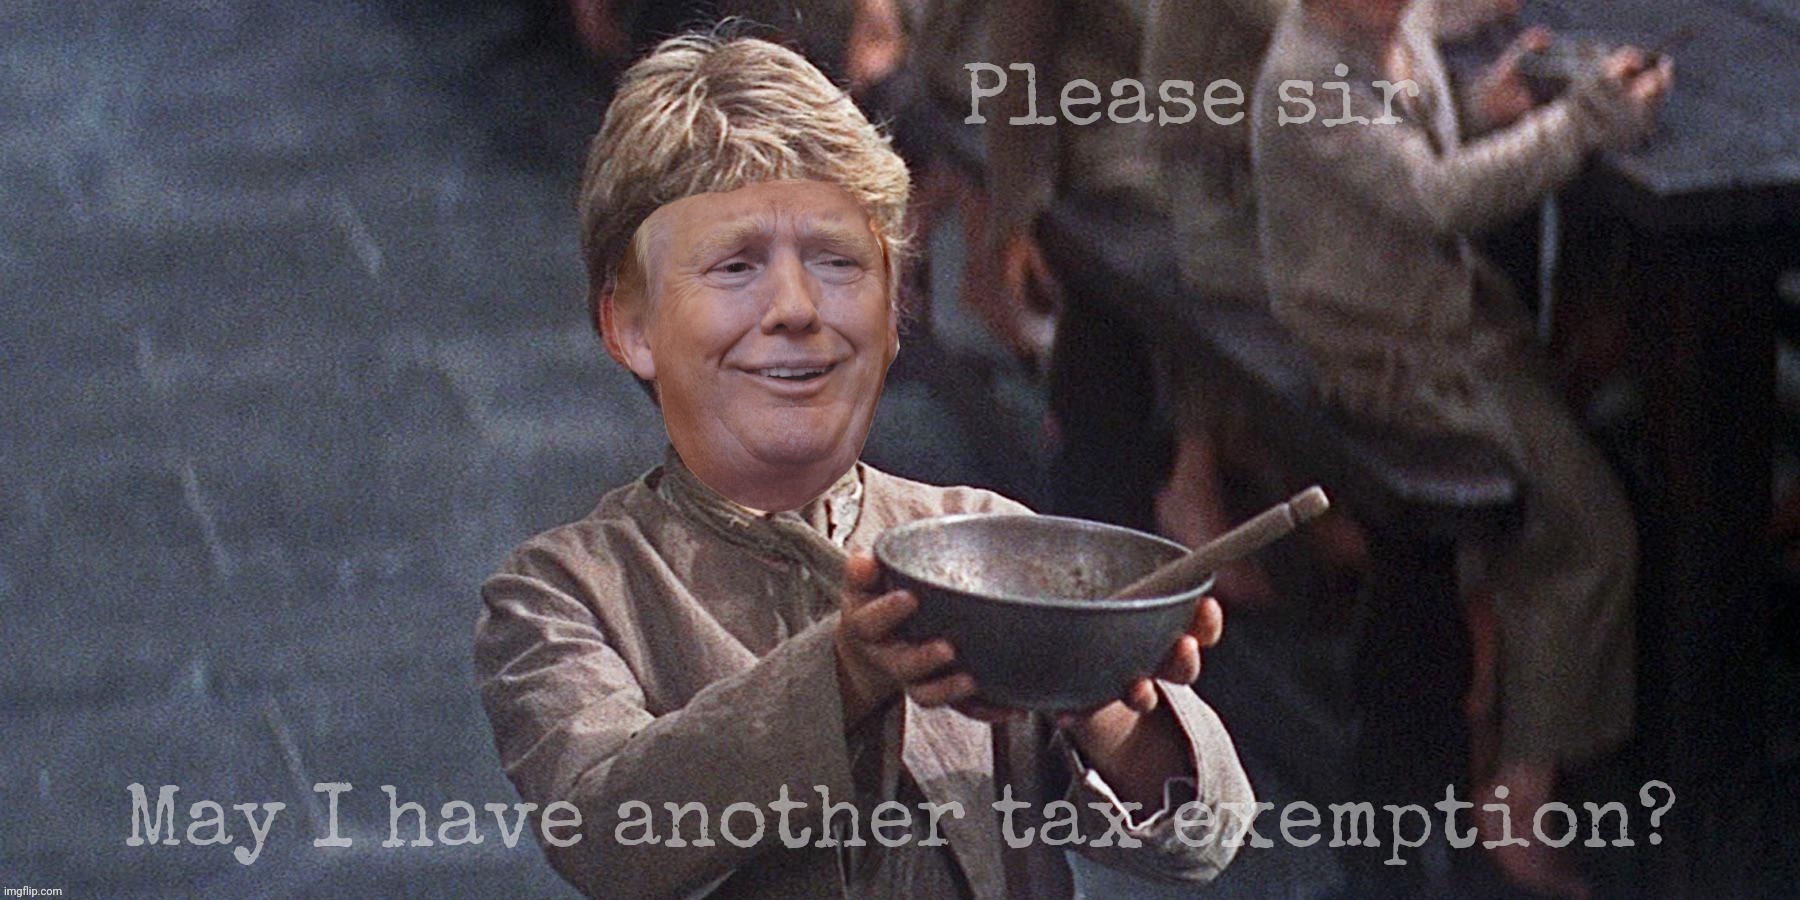 Please help the needy, self-proclaimed billionaires can be poverty stricken too,,, | Please sir; May I have another tax exemption? | image tagged in oliver,oliver twist,oliver twist please sir,donald trump,trump,tax exemptions for the rich | made w/ Imgflip meme maker